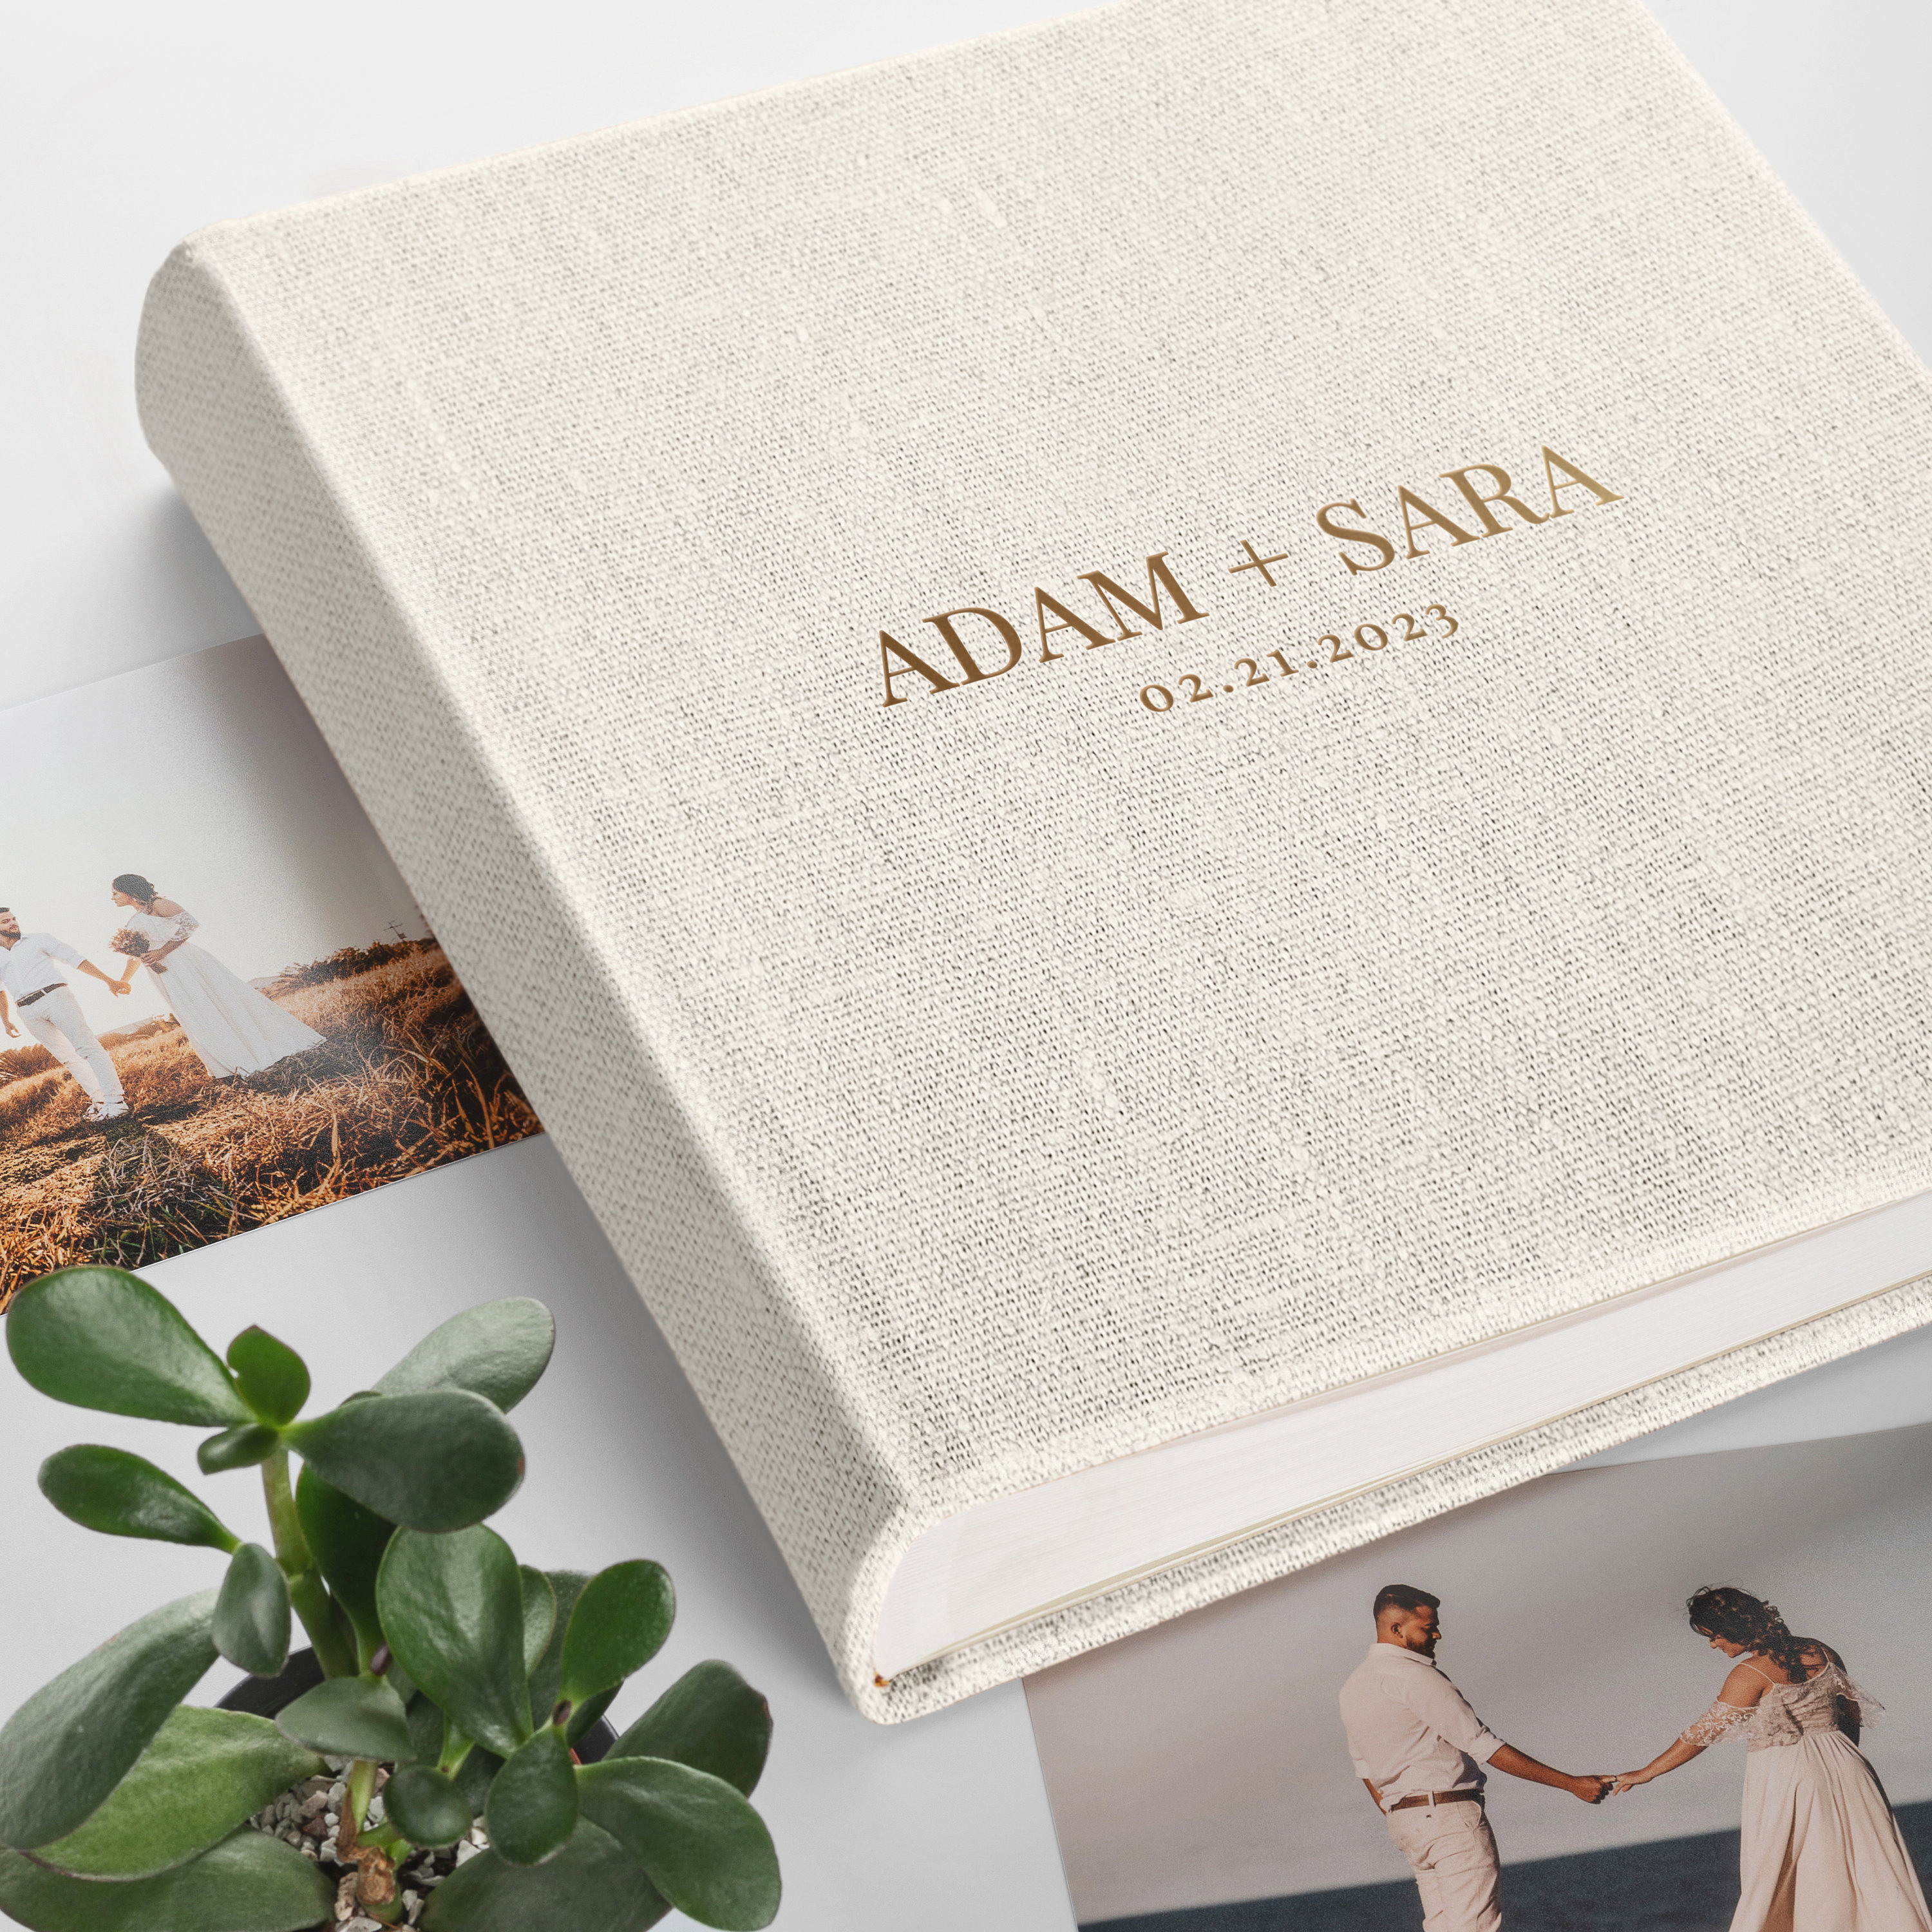 Buy Personalised Letters To The Bride Scrapbook or Photo Album Gift Online